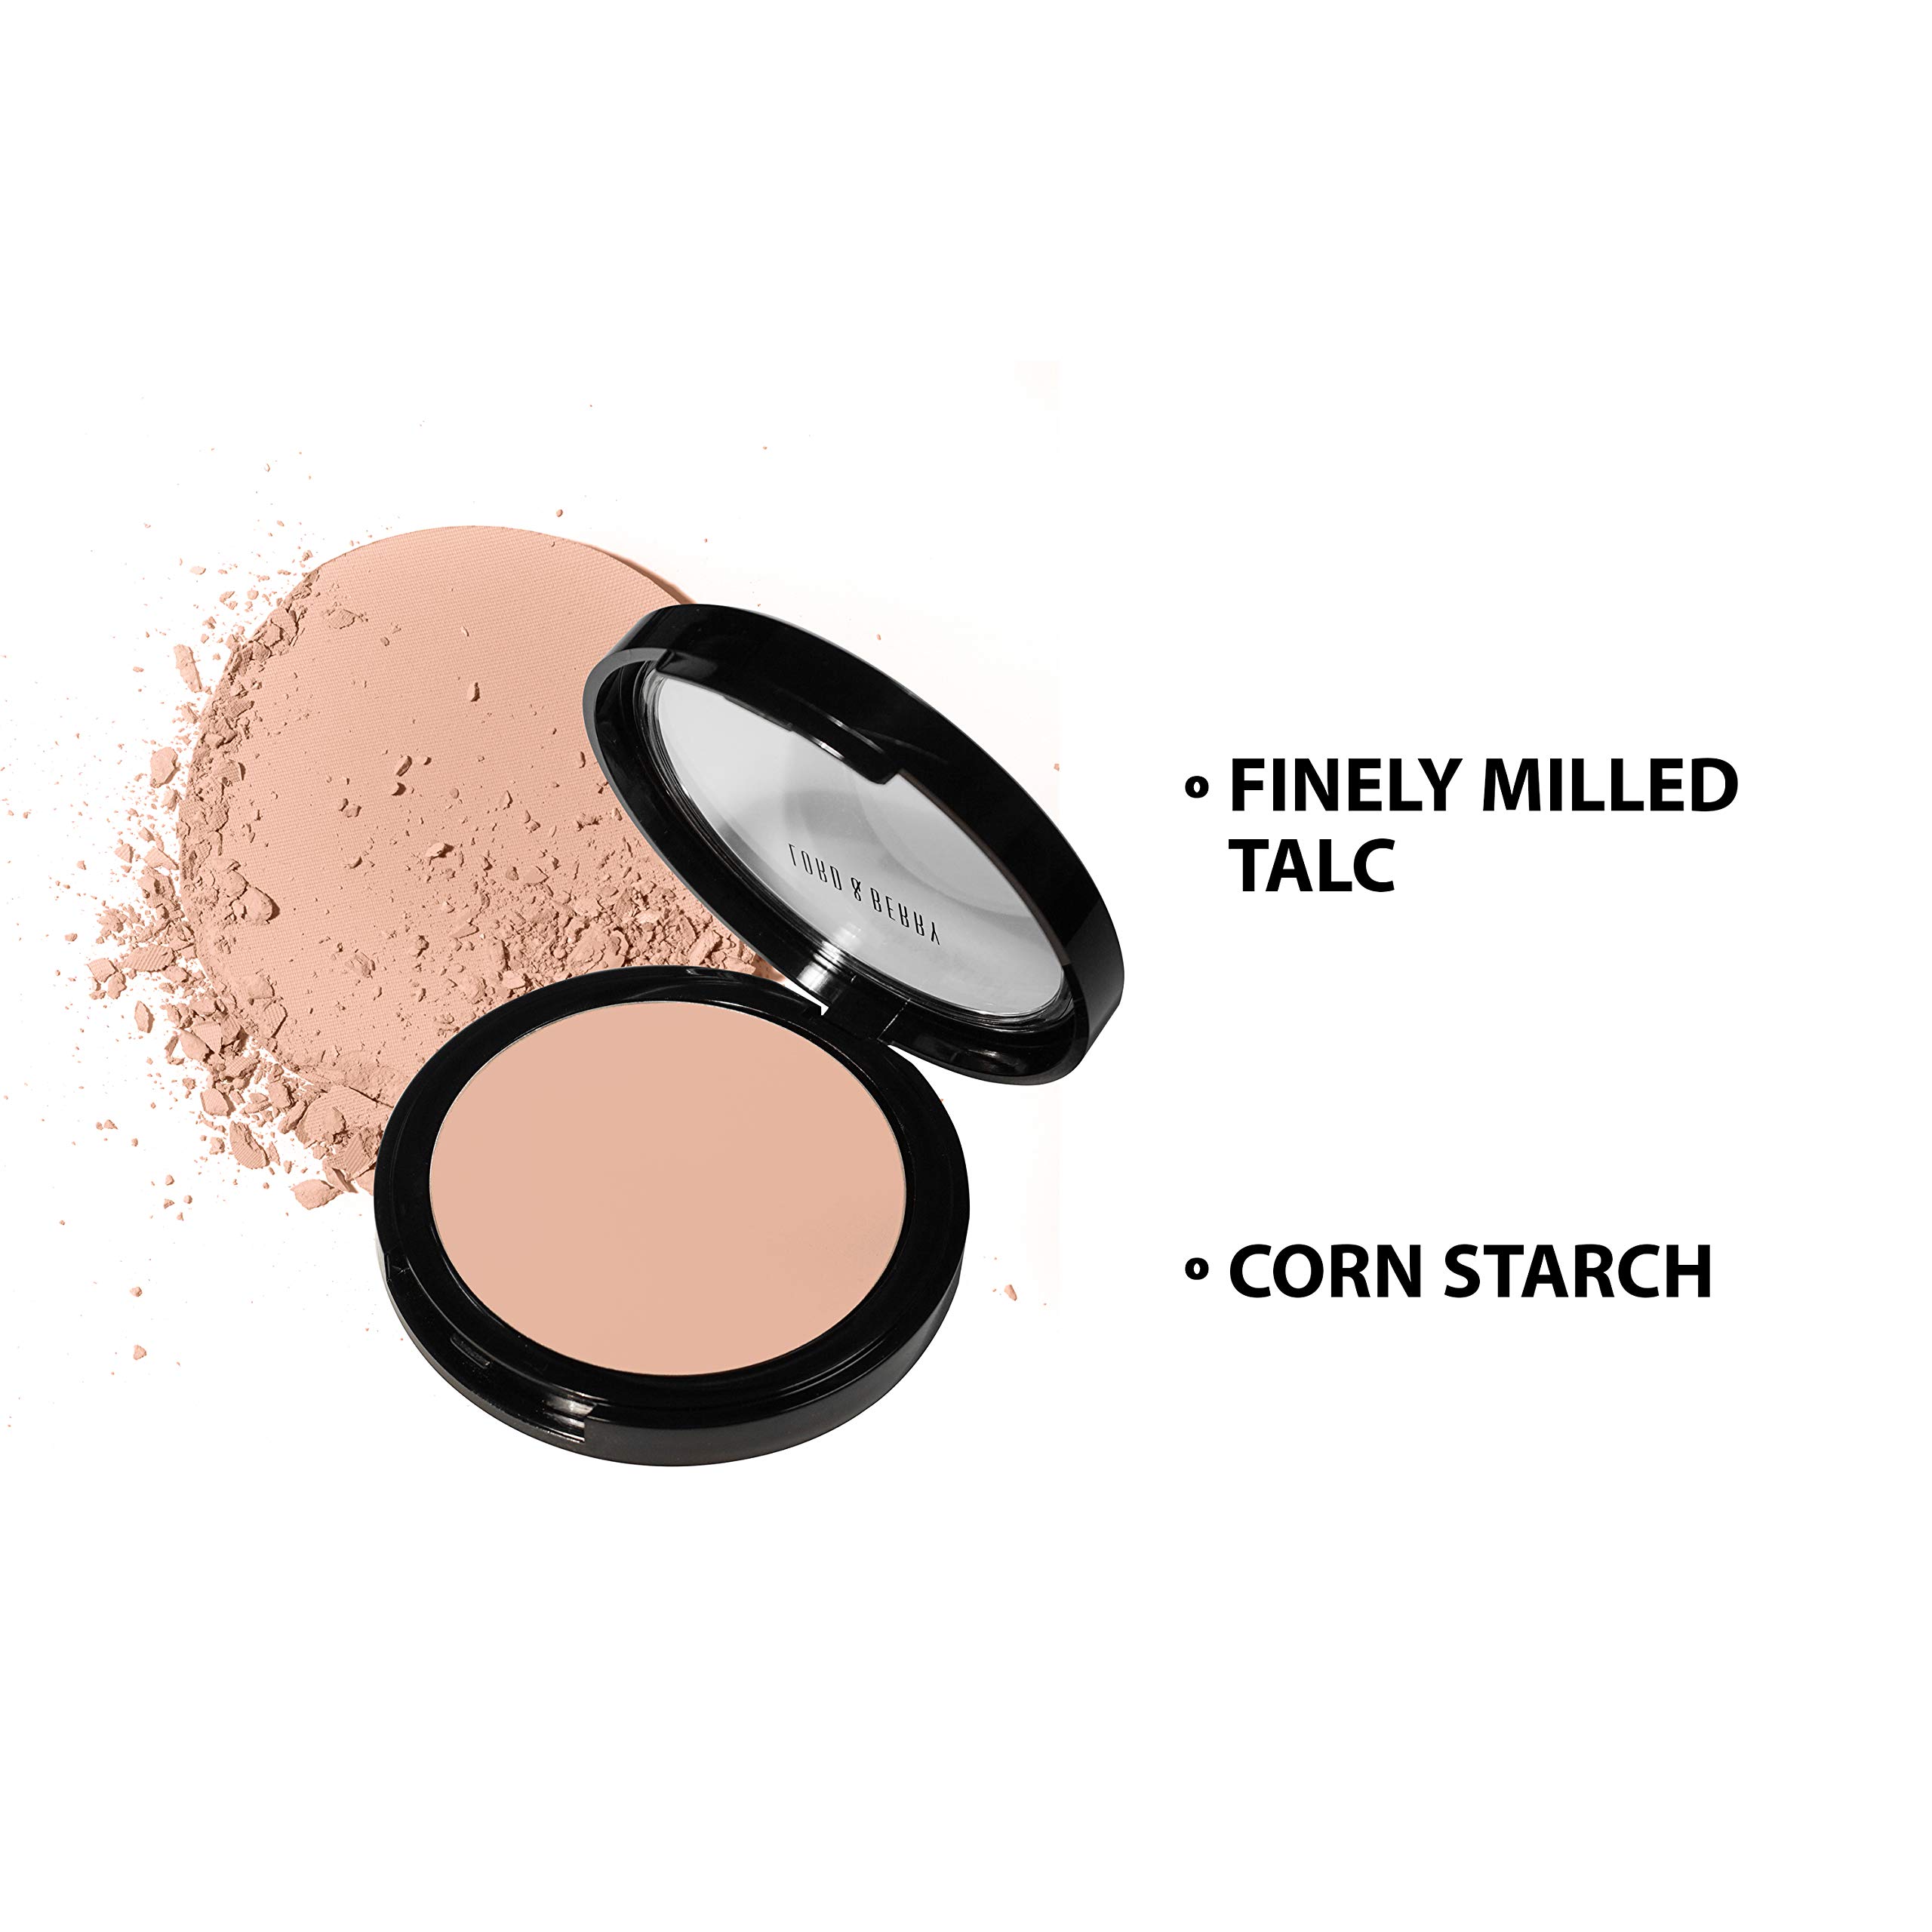 Lord & Berry PRESSED Natural Coverage Long Lasting Shine Control Makeup Powder With Matte Finish